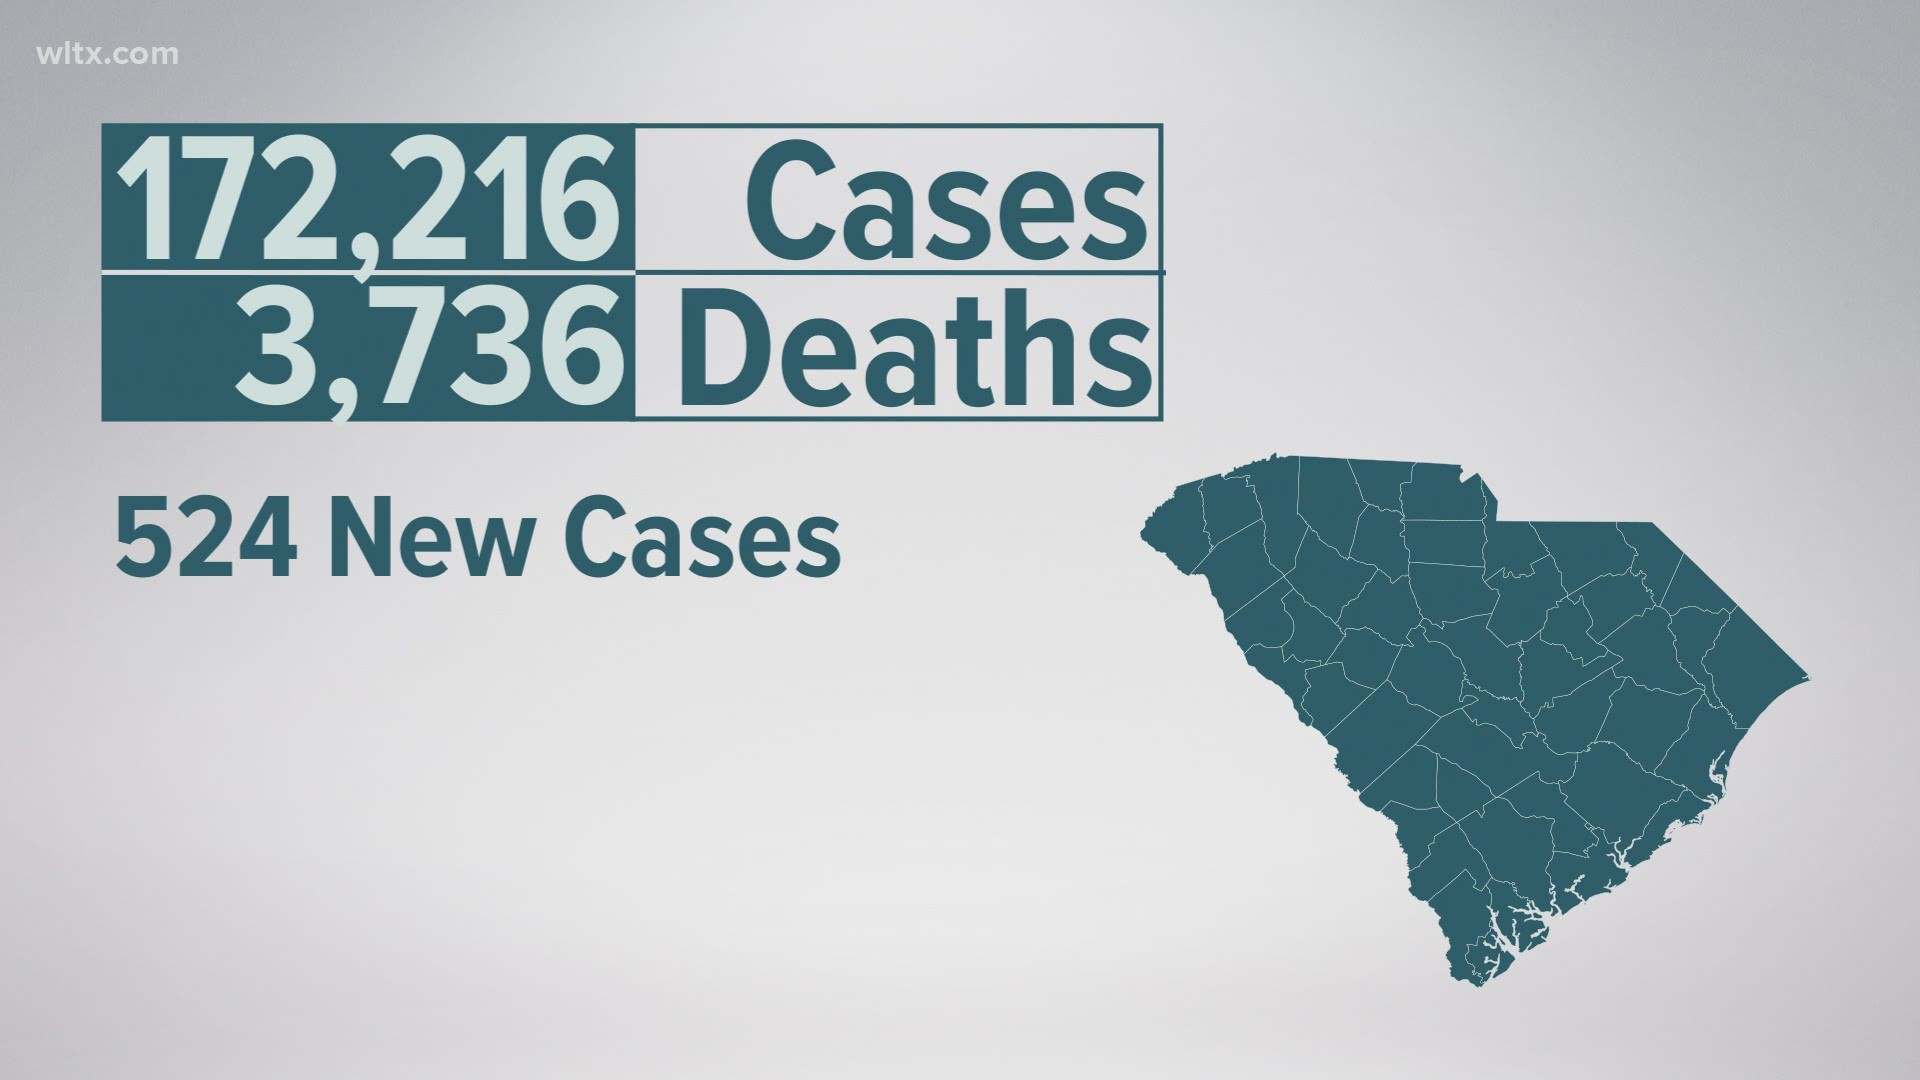 This brings the total number of confirmed cases to 172,216, probable cases to 9,423, confirmed deaths to 3,736, and 256 probable deaths.